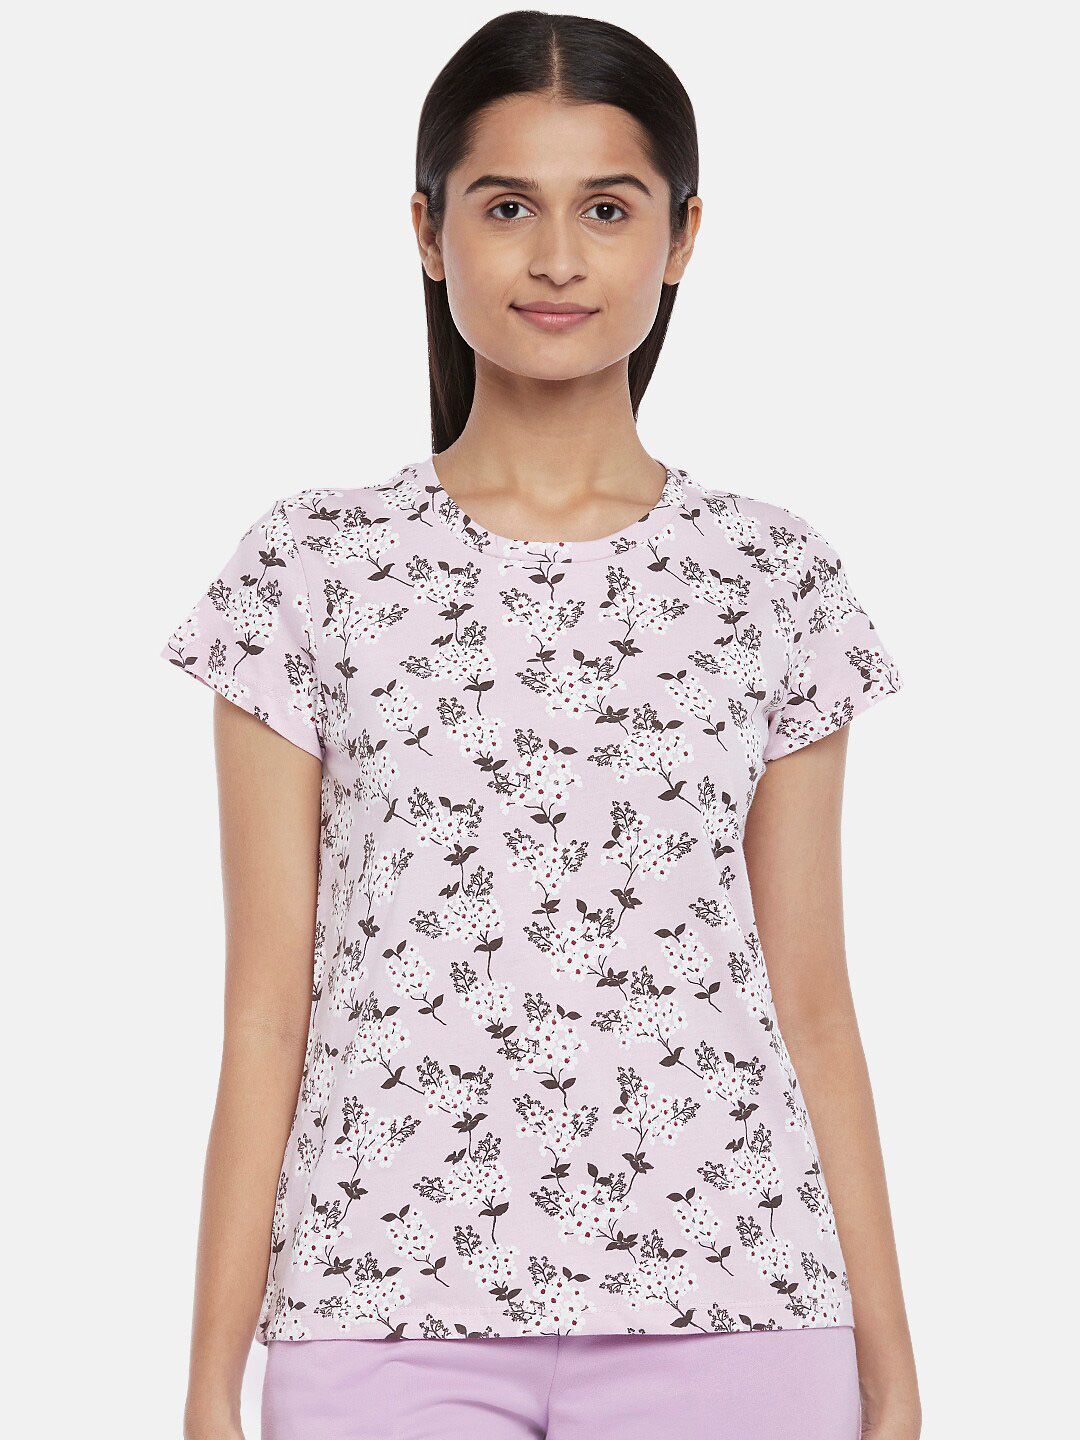 Dreamz by Pantaloons Purple Print Lounge tshirt Price in India